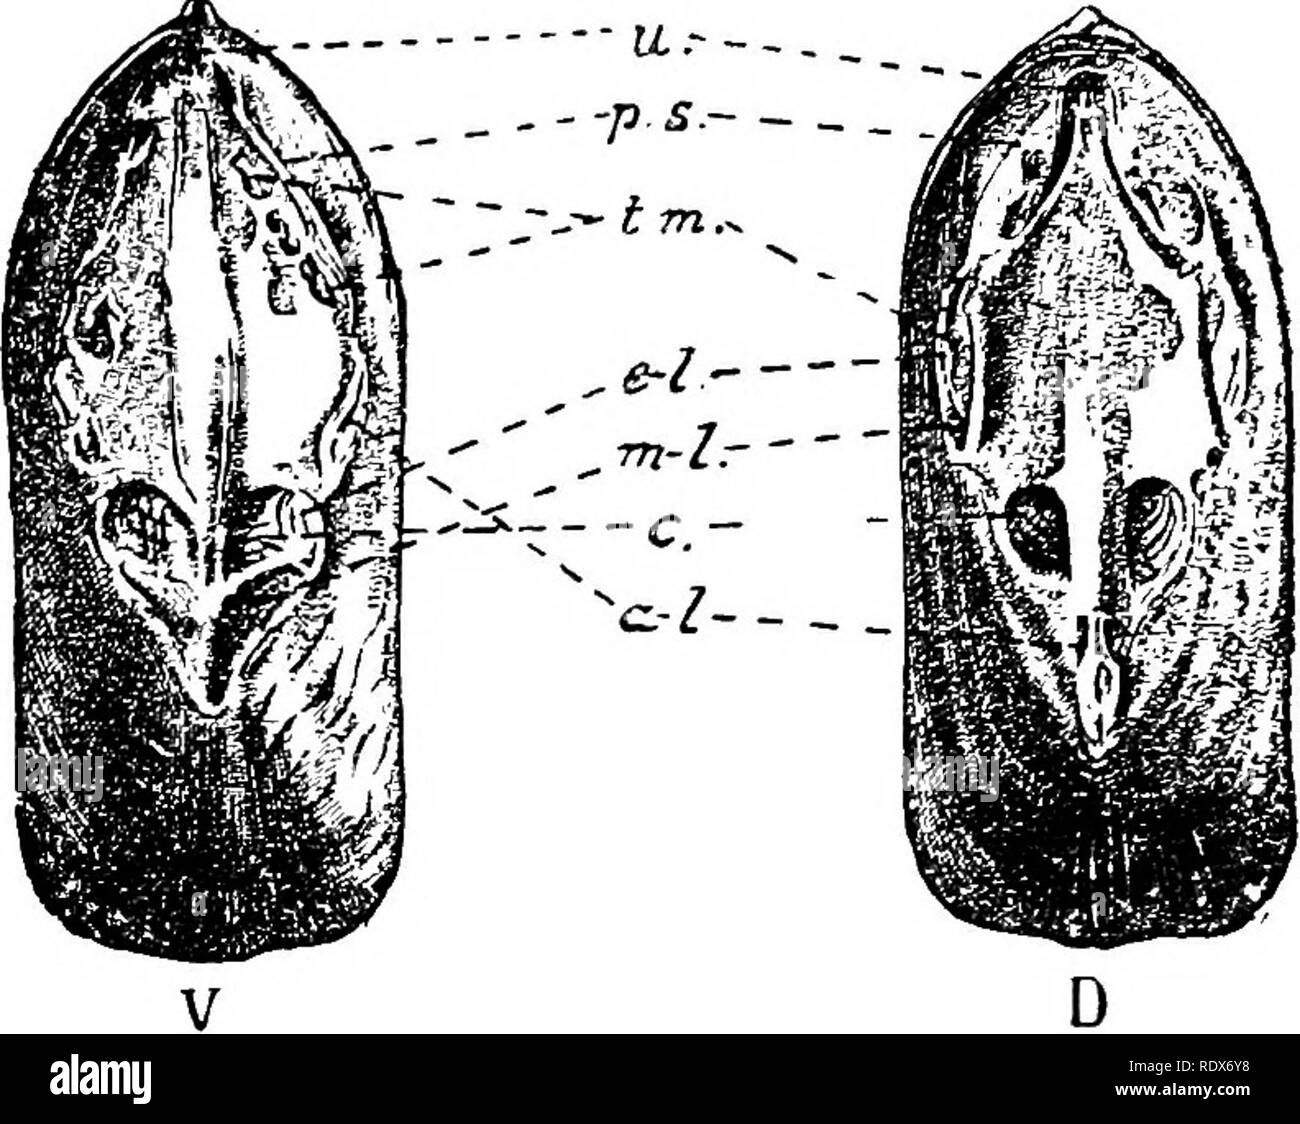 . Natural history. Zoology. 650 BRACIIIOPODA. loads to a sUgUUy-coiled intestine, wliicli may have an anus (Teeienteeata), or may not (Clisieniekata).. J^ij. 5:—A NoN-HiKGKD Bhachiopod {Linr/ula anatina). In- terior of ventral (K.) and dorsal (/&gt;.) valves, showing muBclo scars, named as foUowa ; «., umbonal; p.s., parietal; t.m., transmedian ; e.-L, externo-lateral; 77».-?., medio-lateral; c, central; a.-^, autei'o-latural. Natural Bize, The Bnichiopoda possess a system of blood-vessels, with a contractile heart, a distinct nervous system, and a jjair of excretory organs (nephiidia), which  Stock Photo